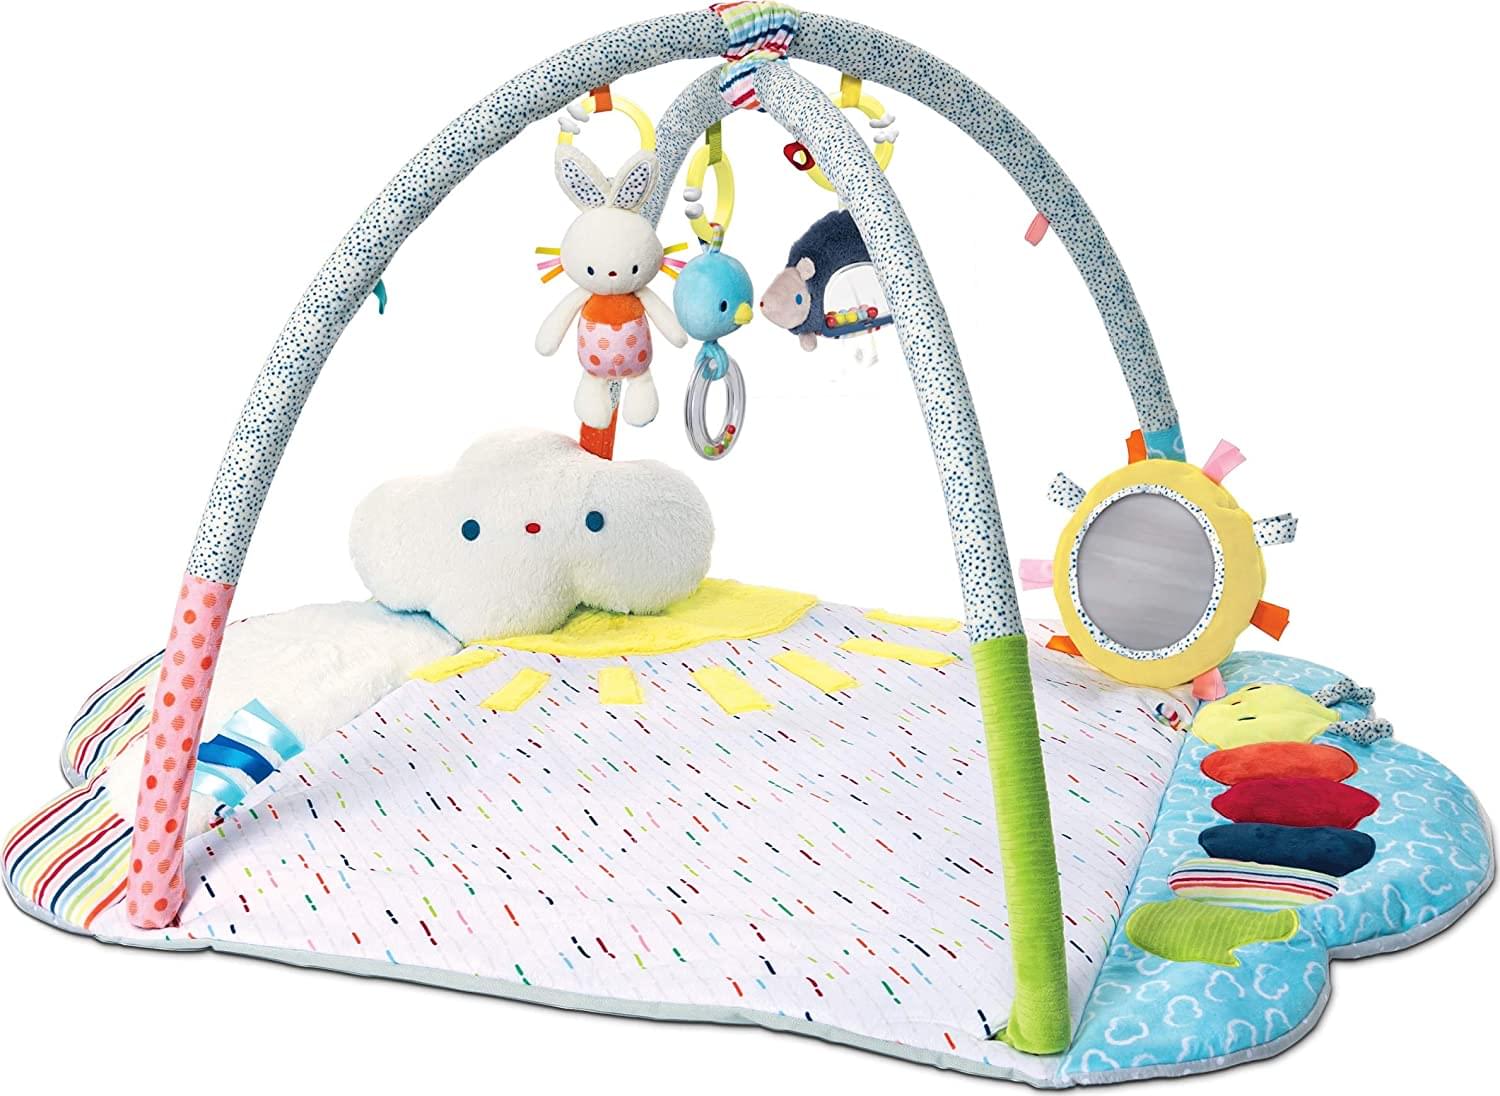 Baby Tinkle Crinkle & Friends Activity Gym | 8-Piece Plush Set